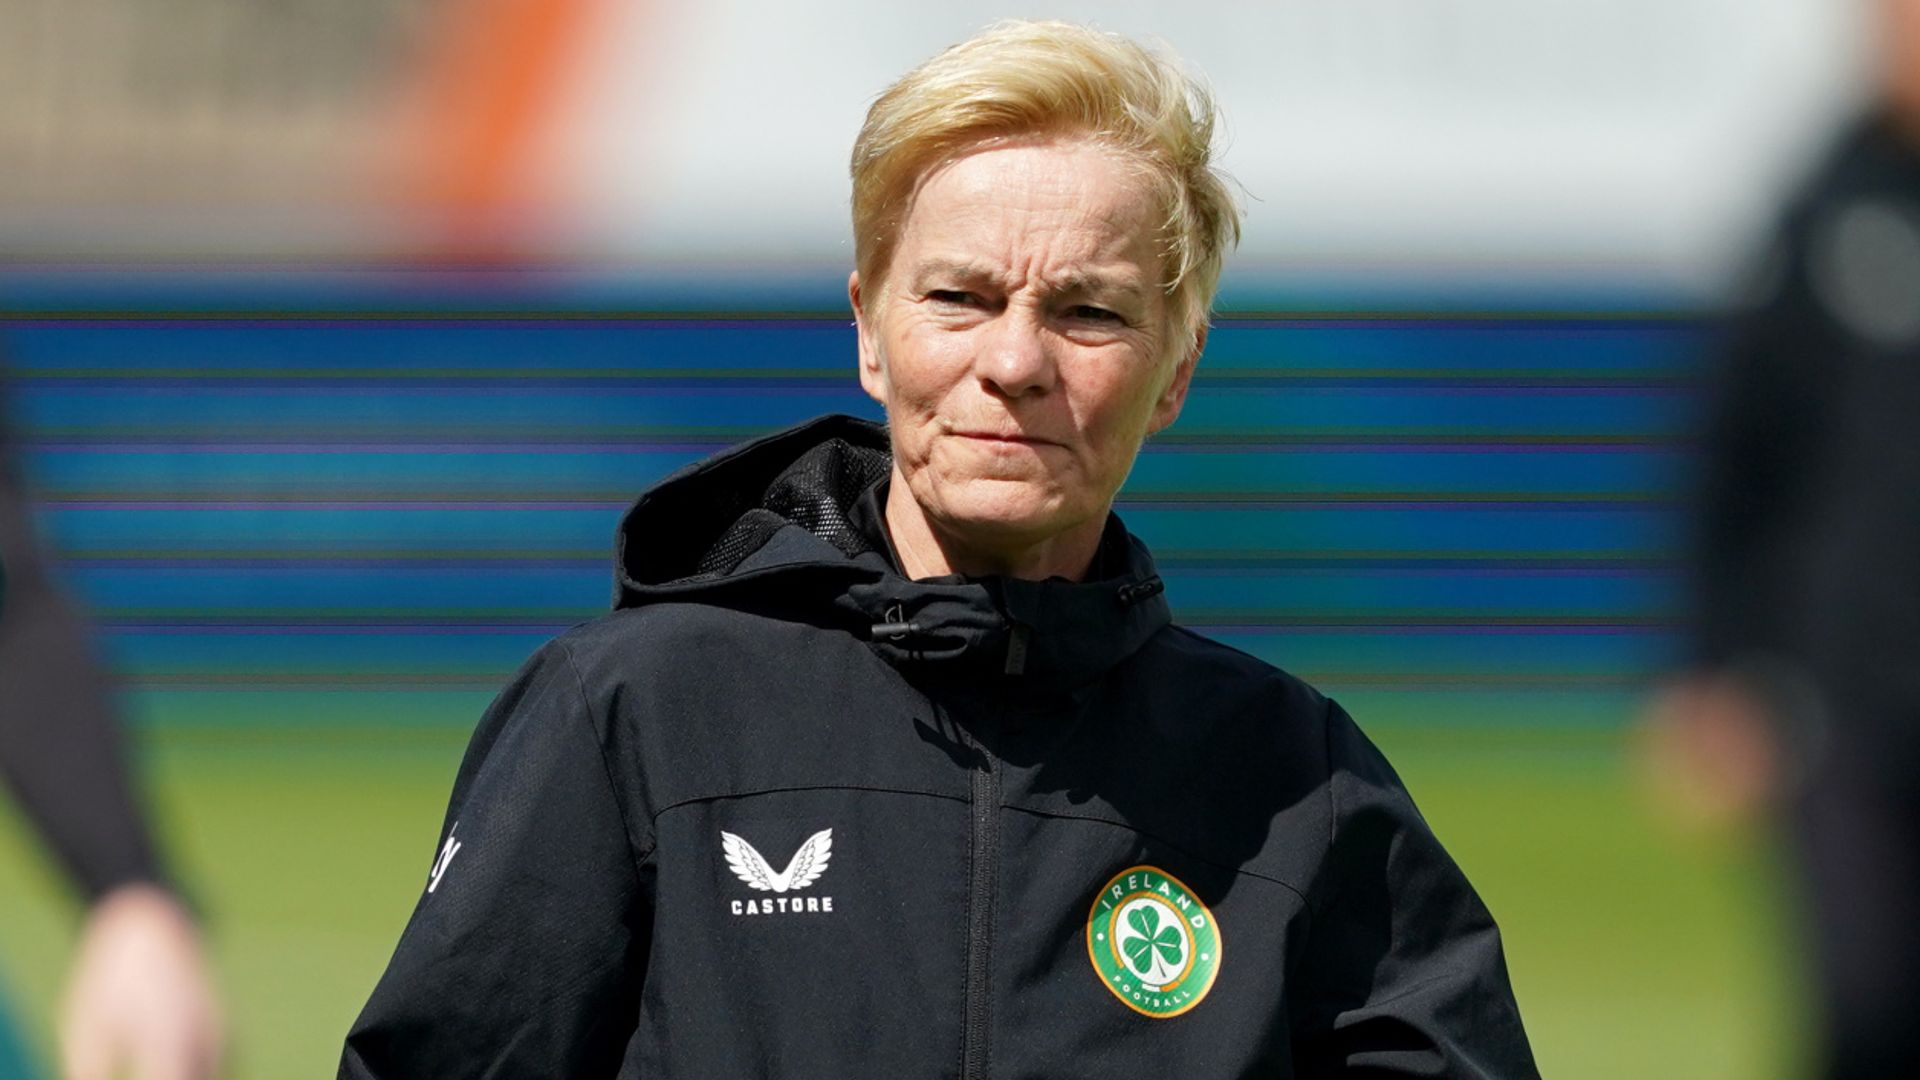 Ireland boss Pauw on body-shaming claims: 'It's a lie - I can't win'